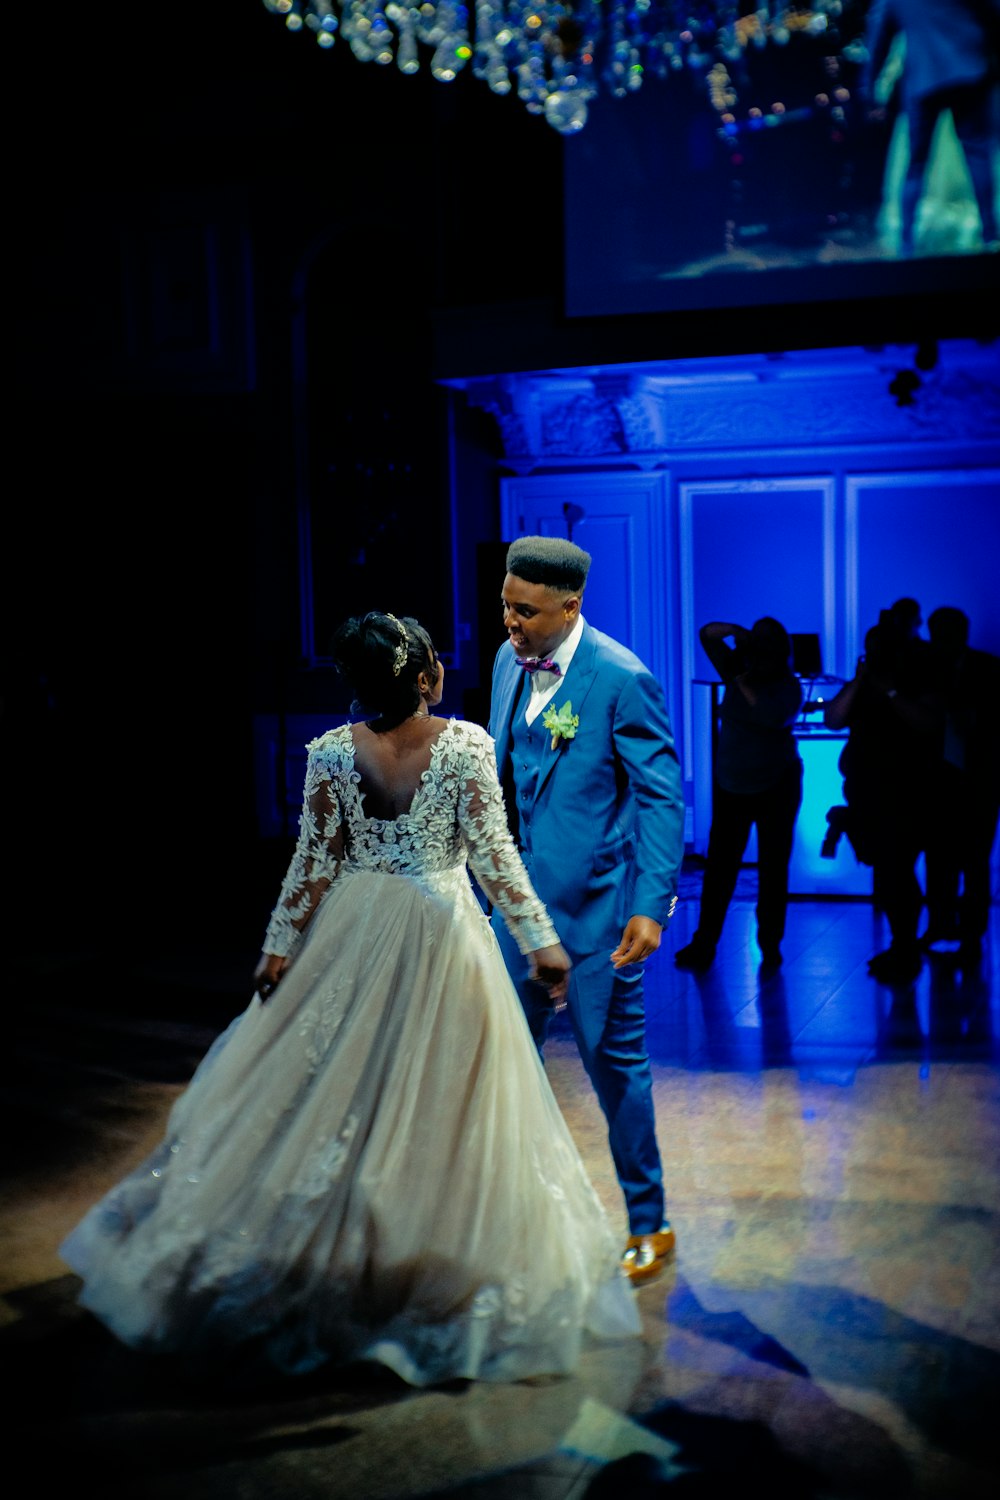 man in blue suit jacket and woman in white wedding dress walking on hallway